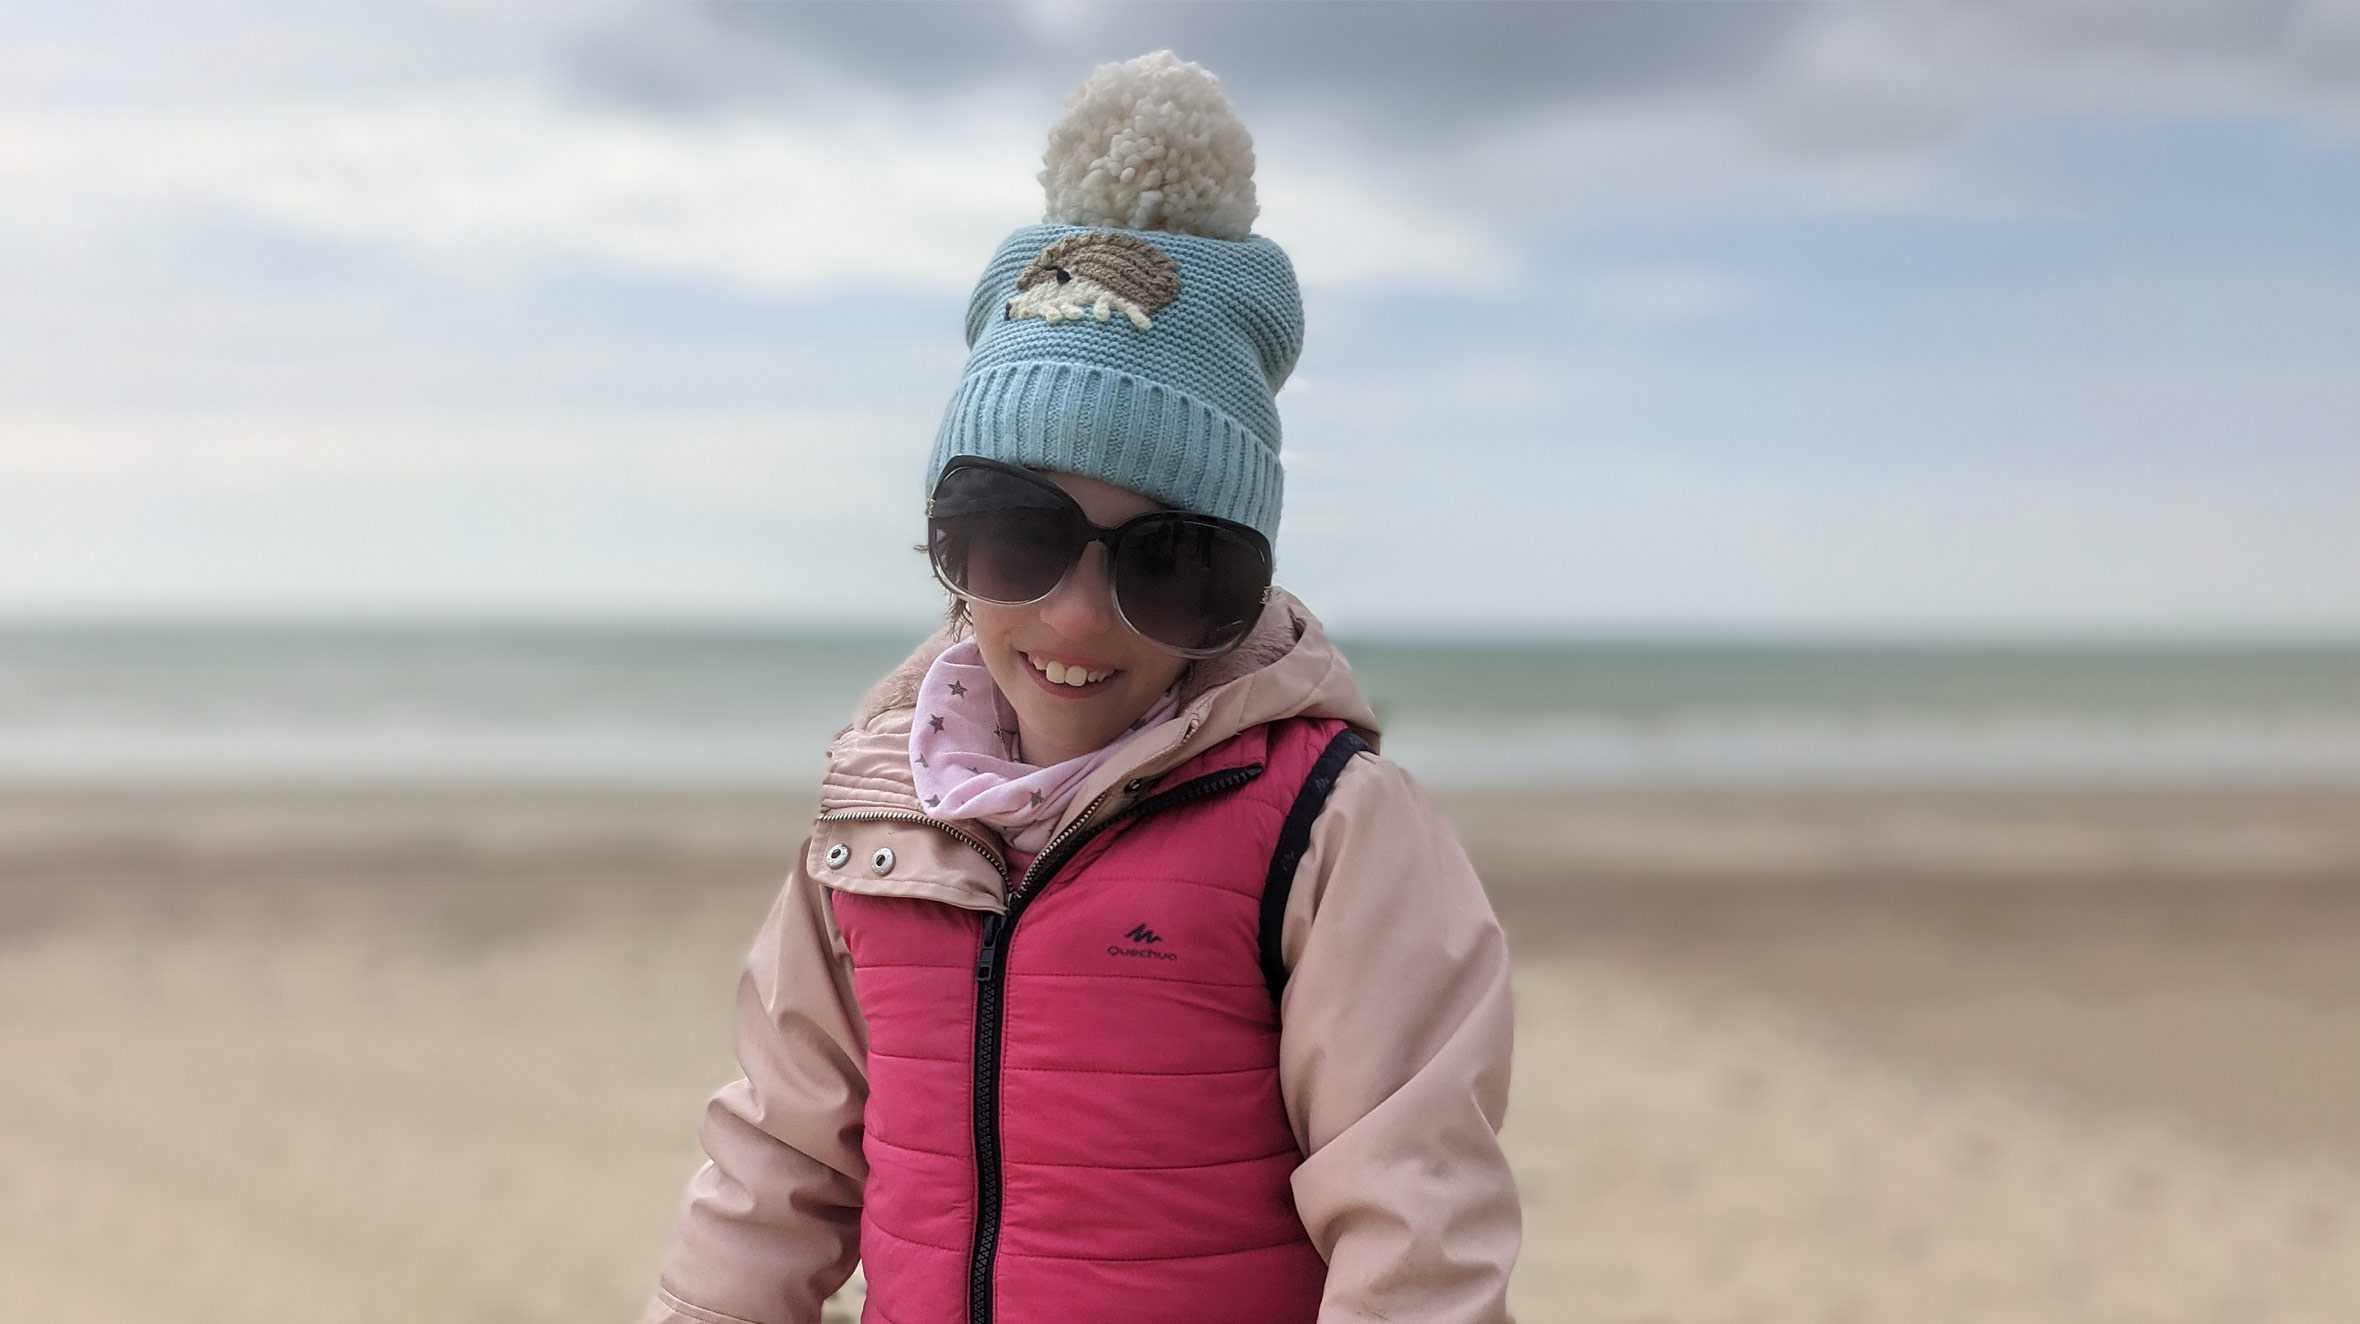 Ella wearing sunglasses and a bobble hat on the beach during her wish to have a UK coastal holiday.